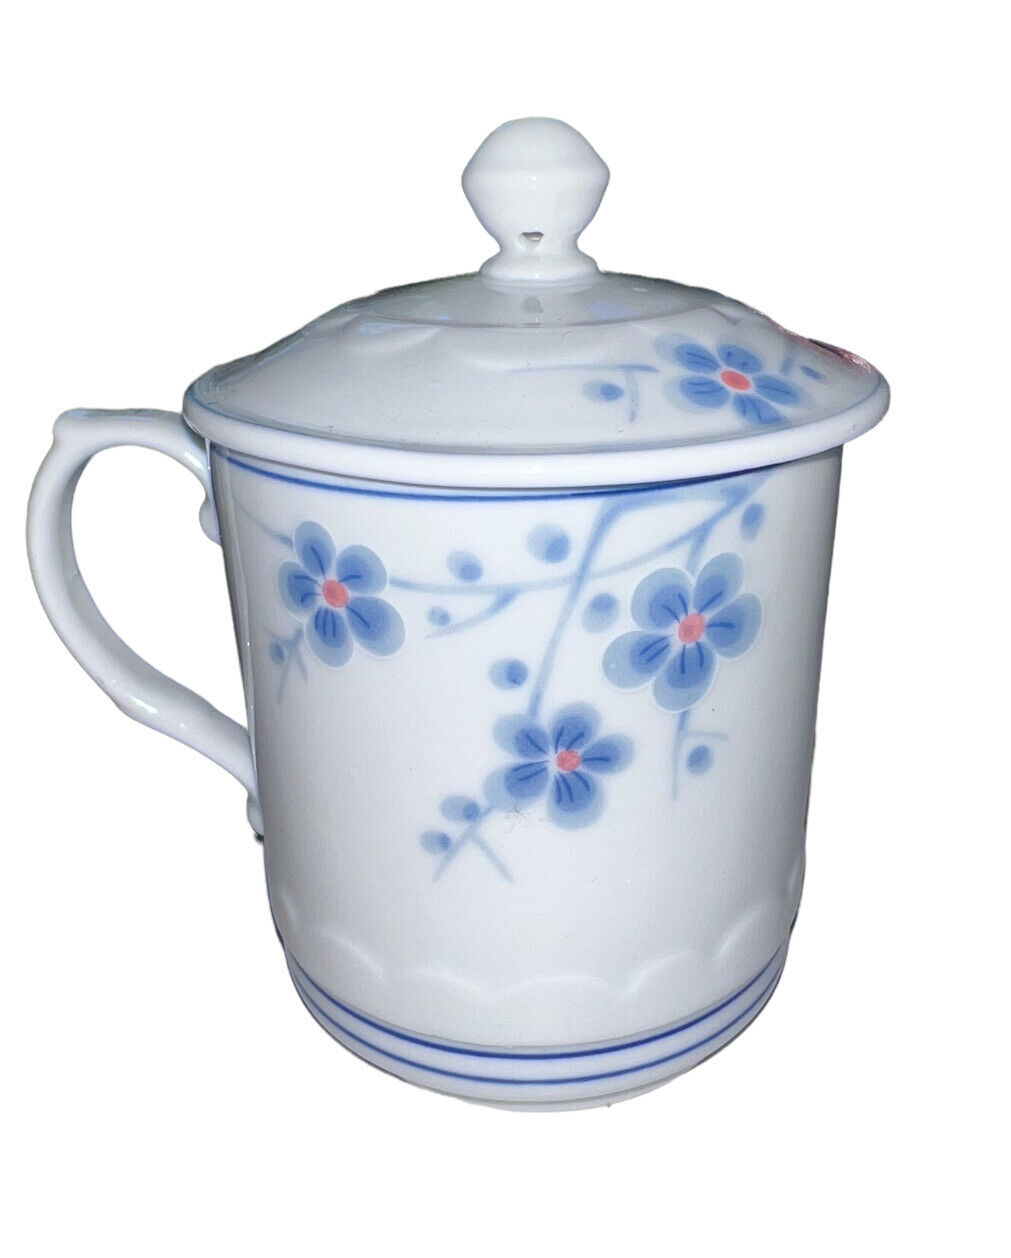 Cheng's Mug With Lid Teacup Floral Cosmos Blue Pink White Jade Porcelain